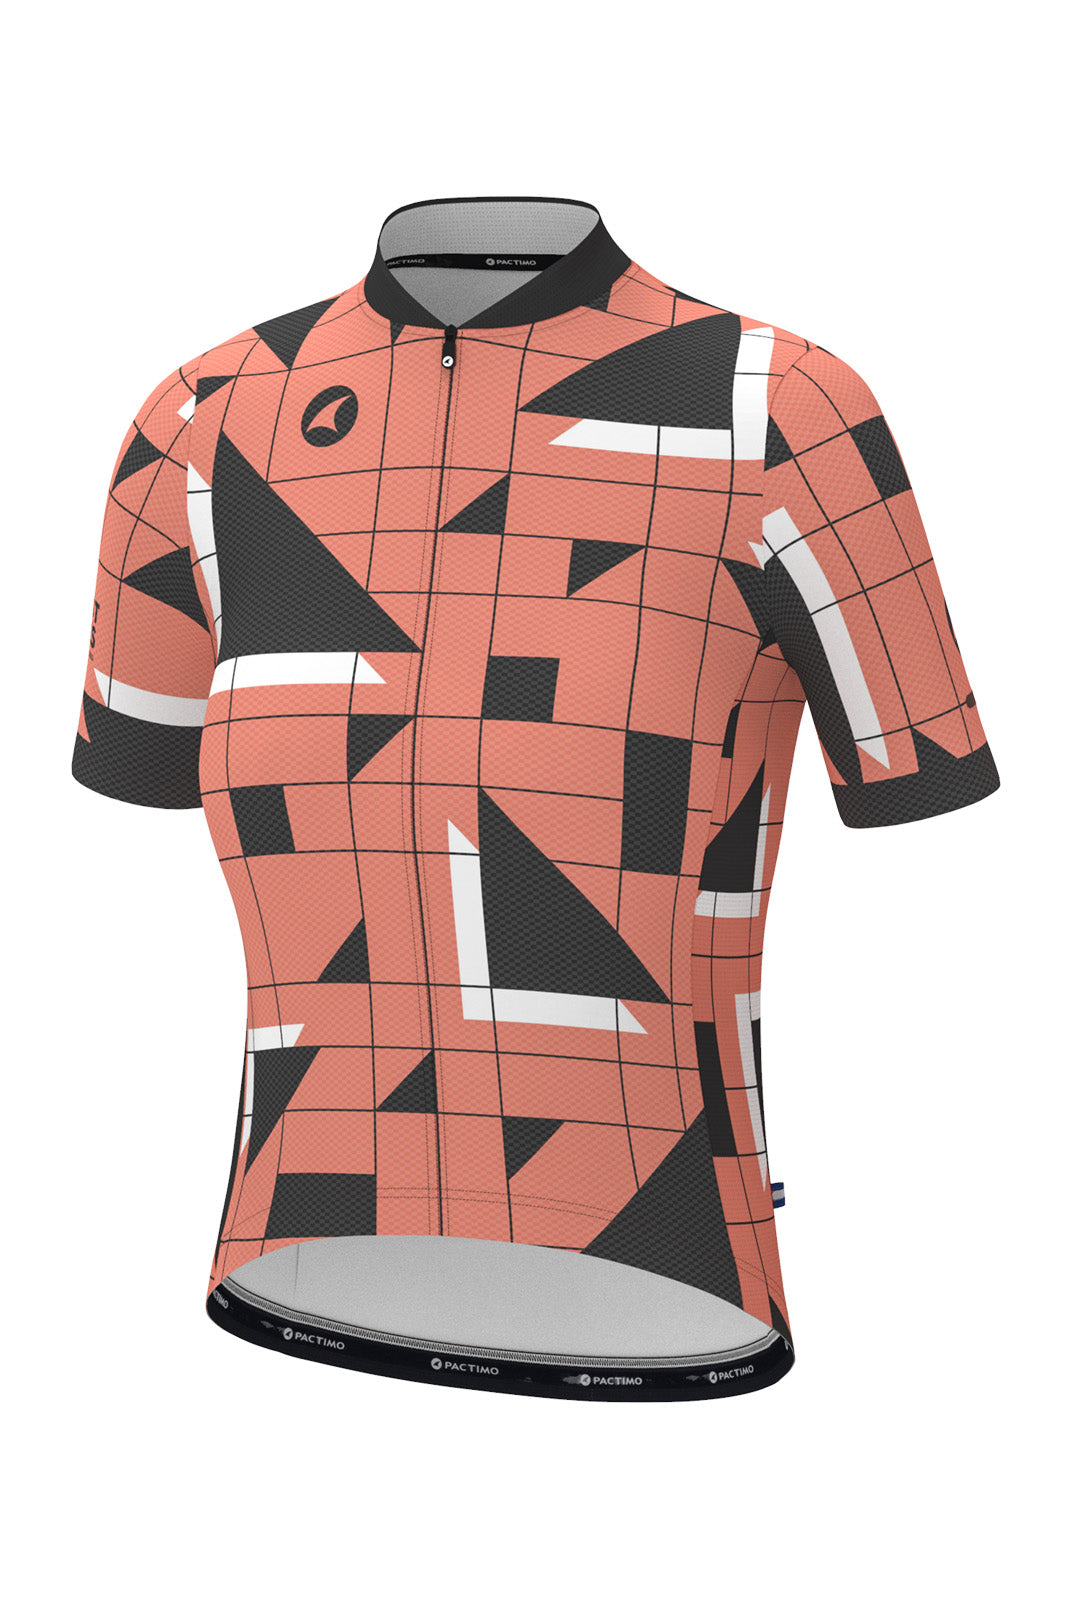 Women's Red Unique Cycling Jerseys - Sandra Fettingis Front View